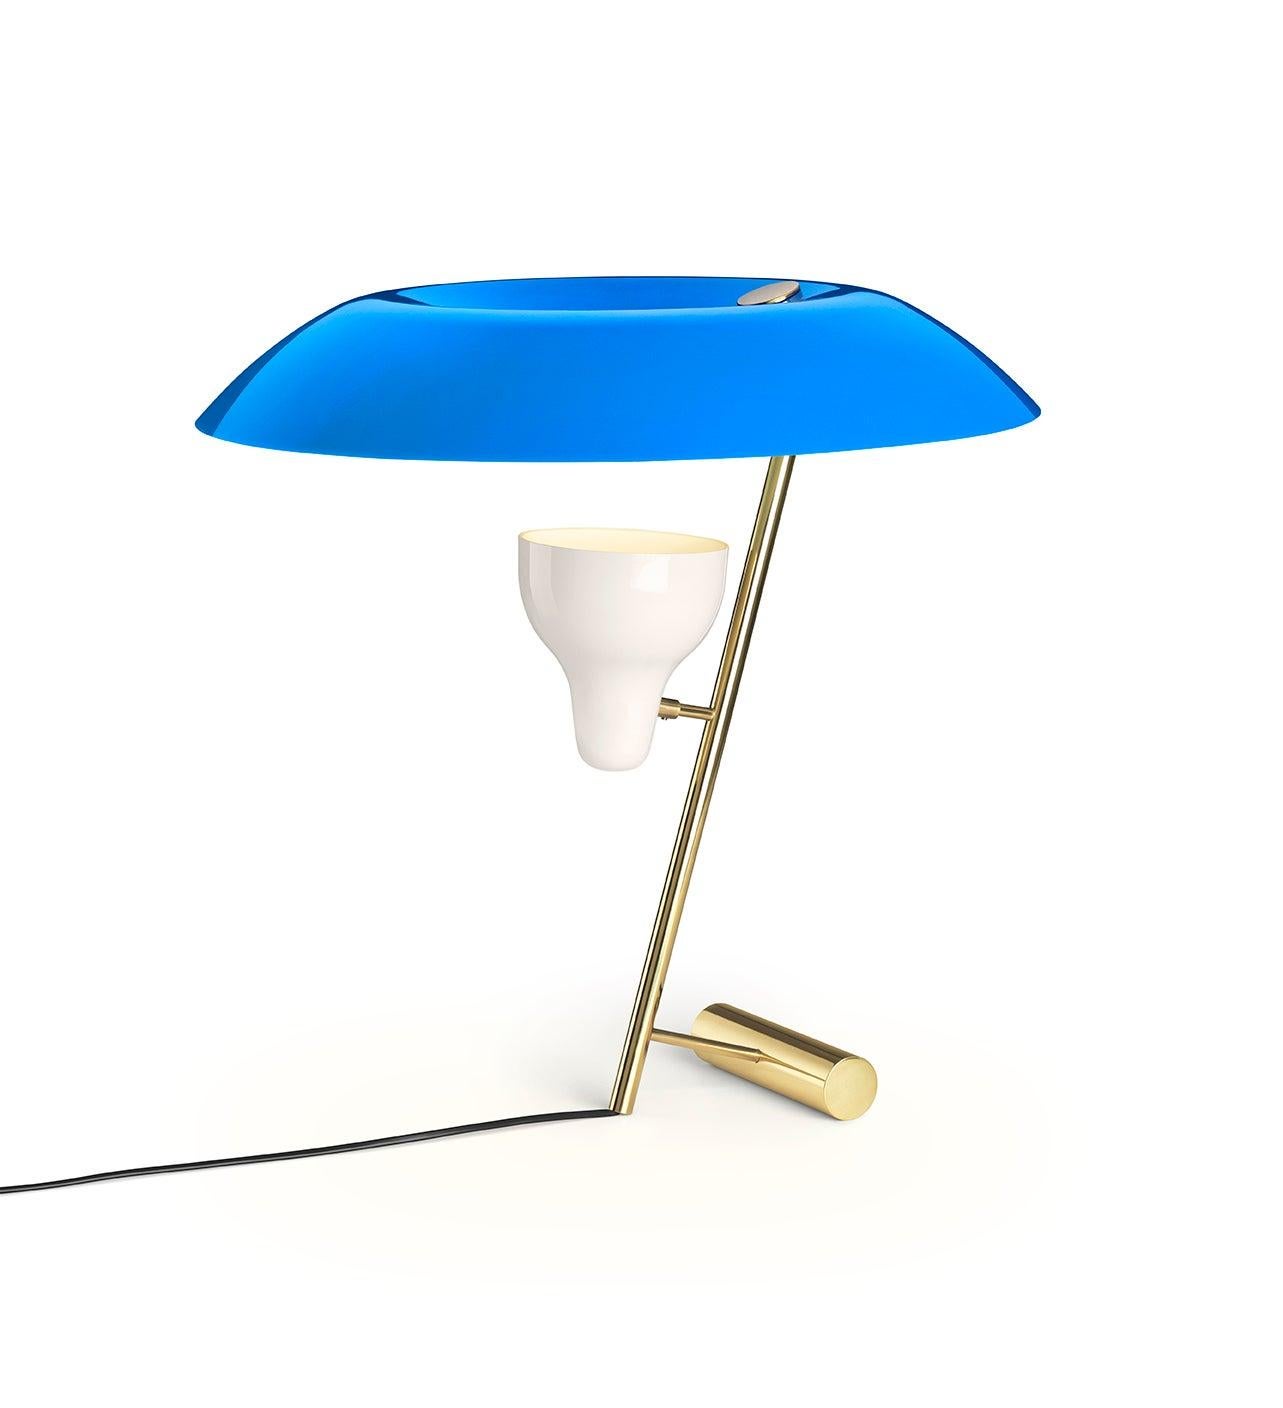 Gino Sarfatti Lamp Model 548 Polished Brass with Blue Difuser For Sale 4